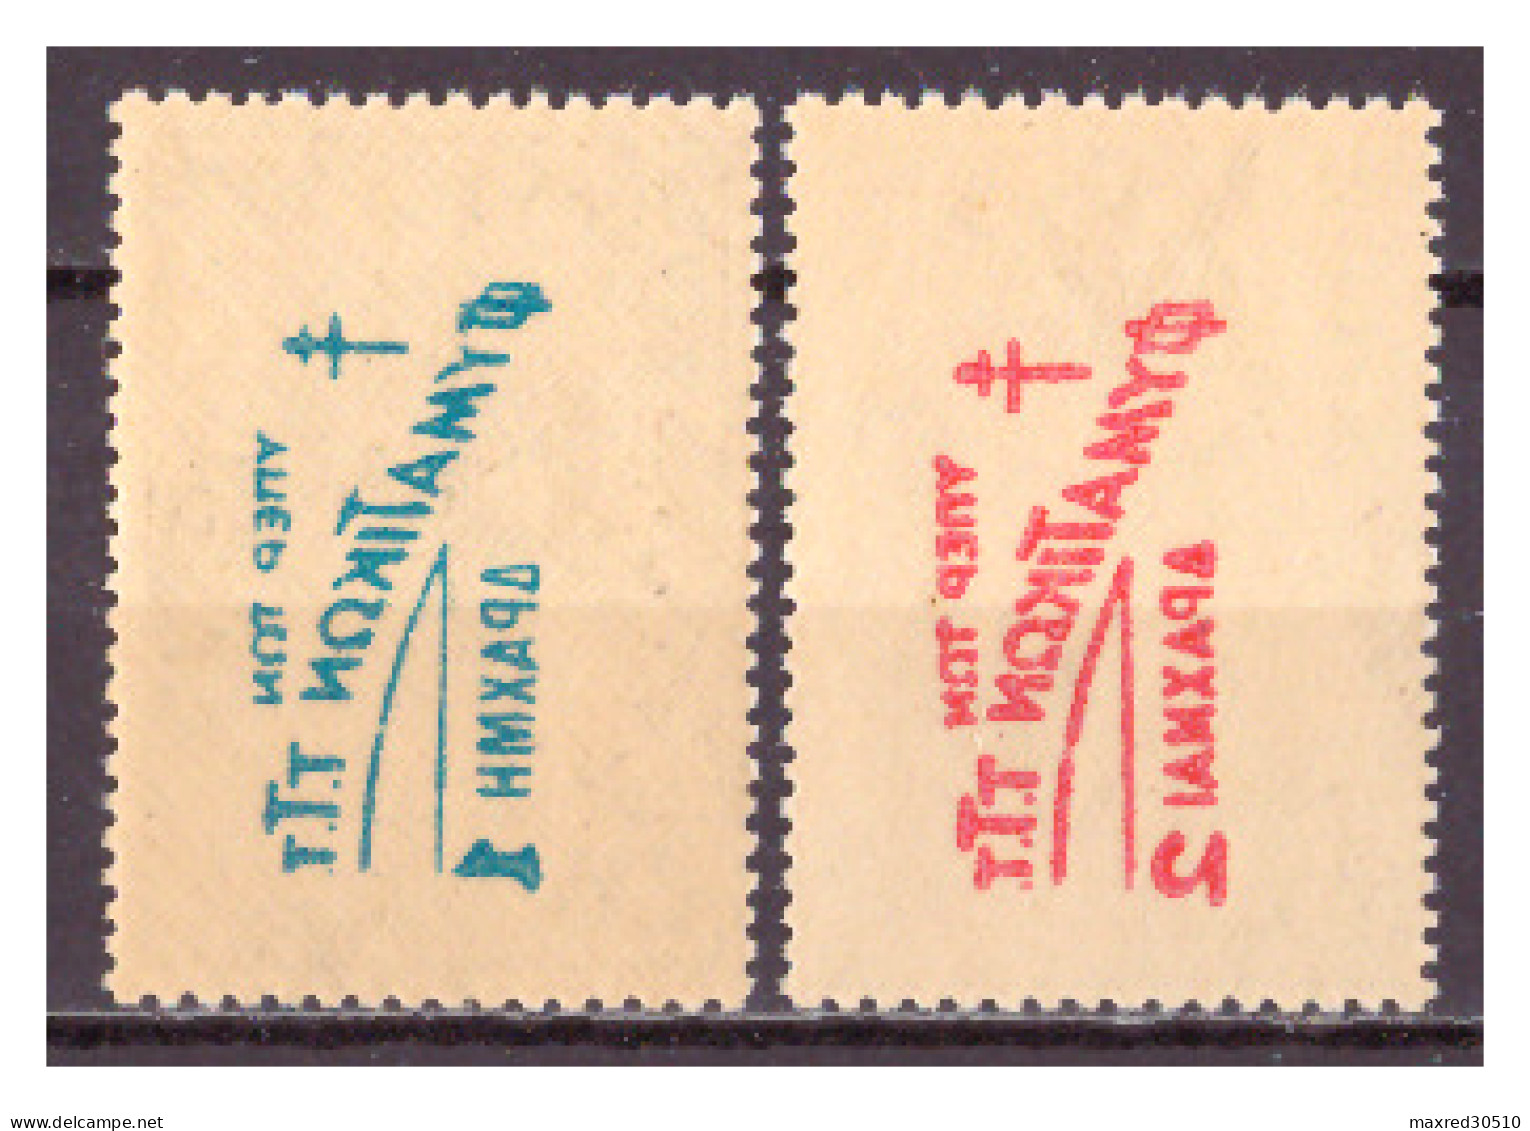 GREECE 1945 CHARITY SET "1937 STAMPS WITH OVERPRINT" WITH MIRROR PRINTING AT THE GUM ERROR MNH - Errors, Freaks & Oddities (EFO)